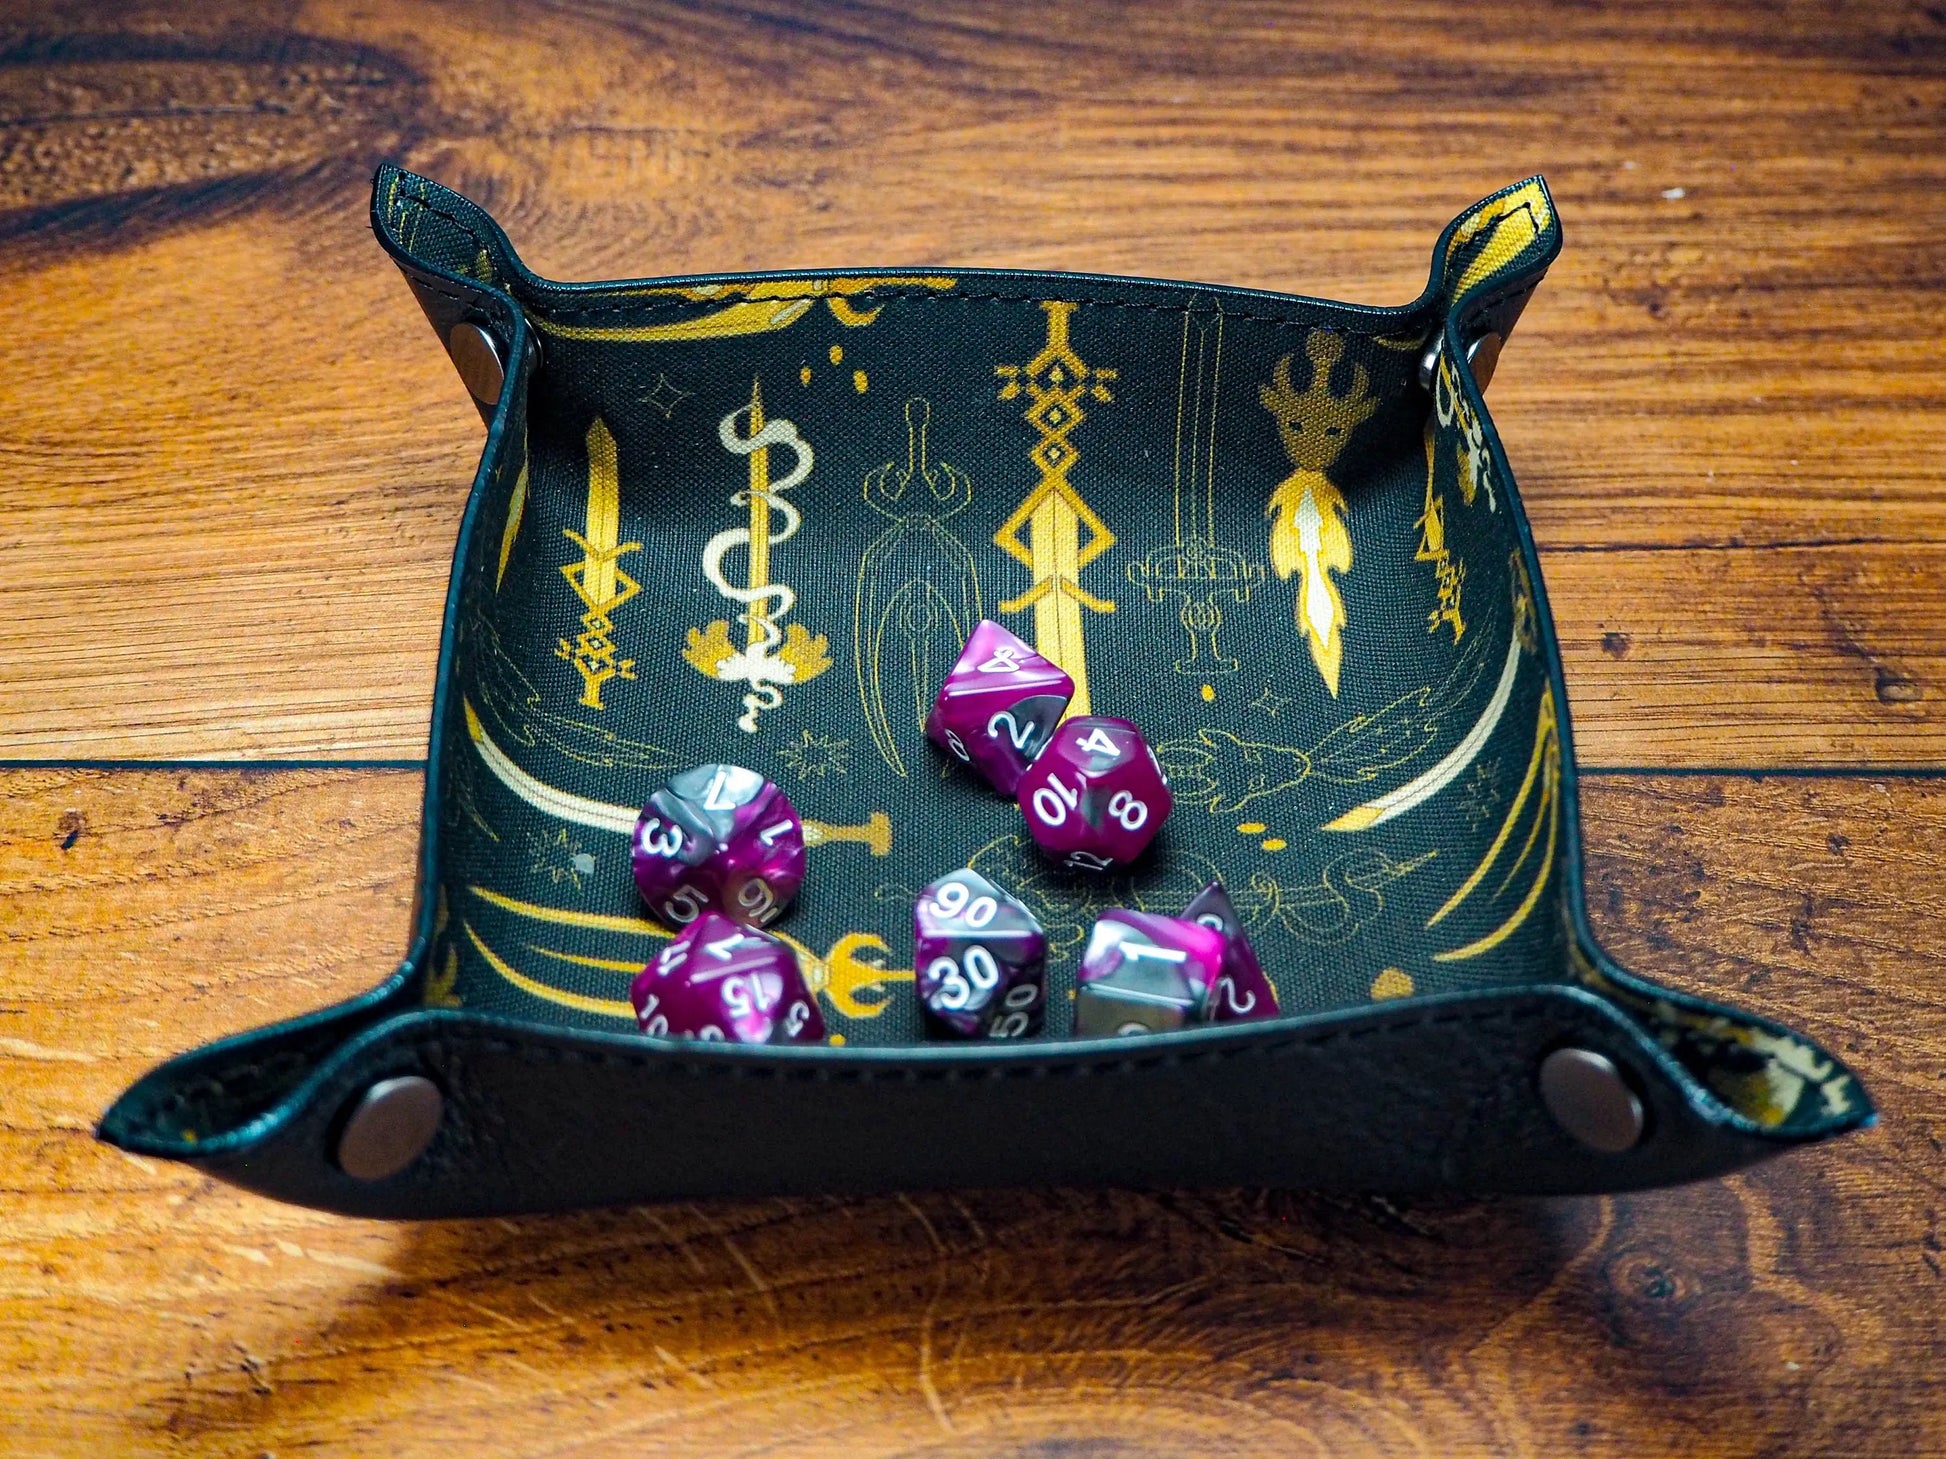 Swords Canvas and Leather Dice Tray - Leather Valet Tray and Catch All Tray. Fantastic DnD Gifts for Dice Games EmBrace Leather